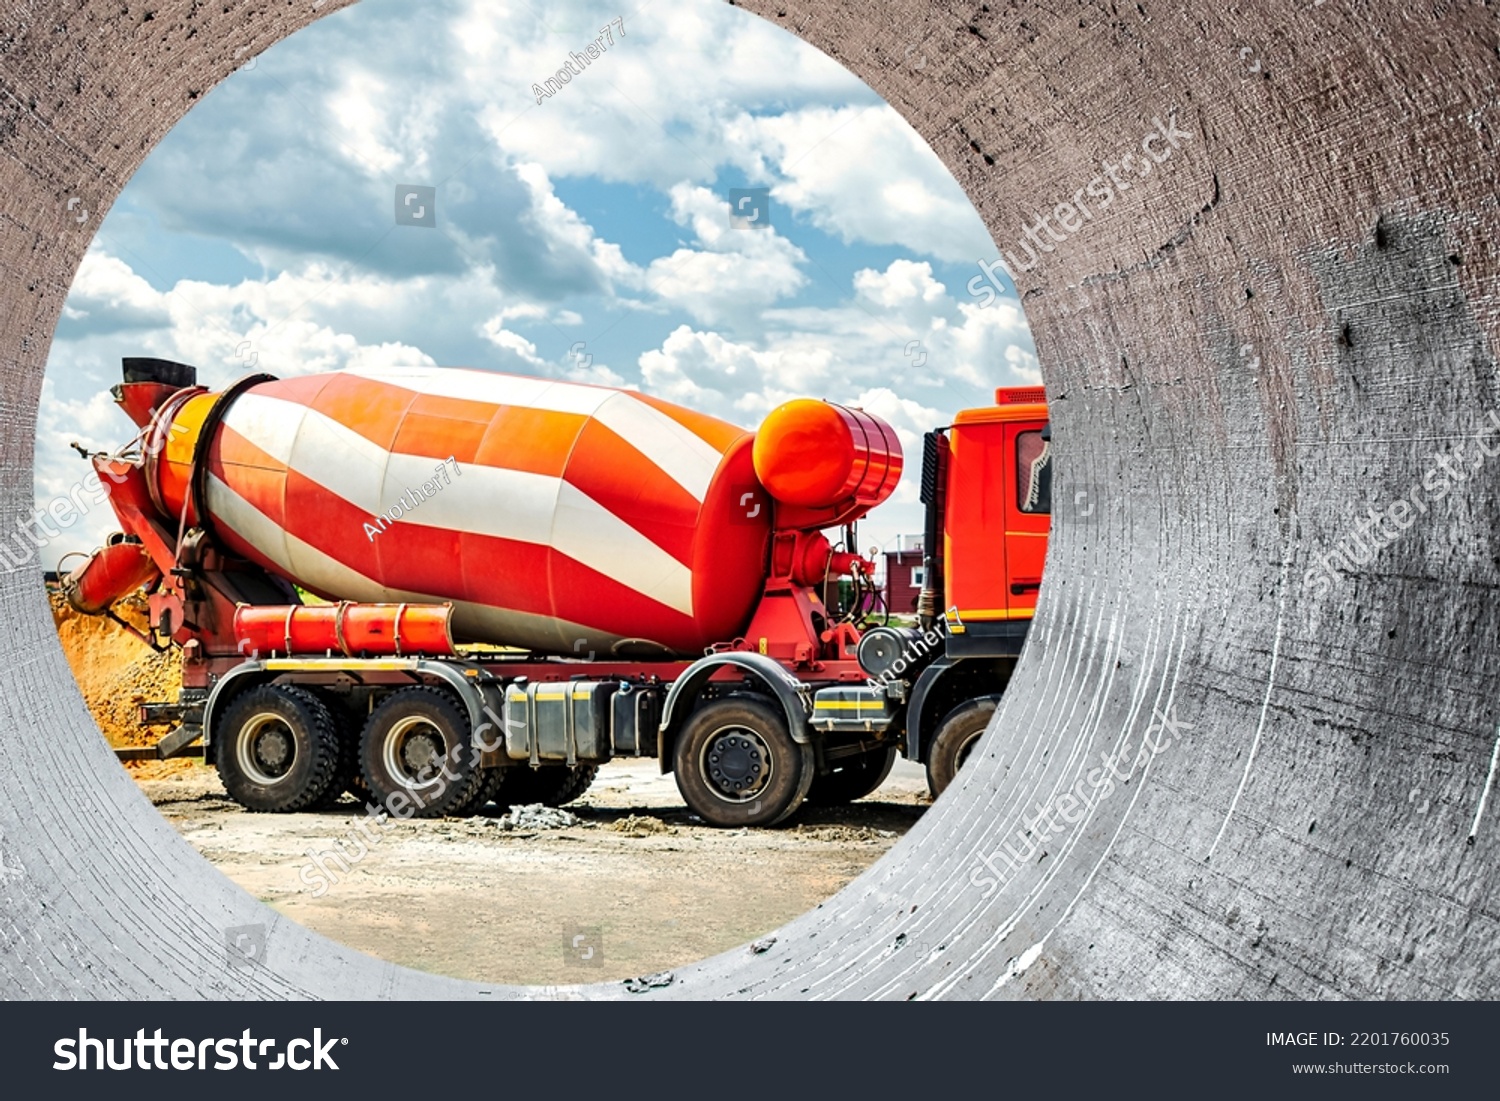 Concrete mixer truck in front of a concrete batching plant, cement factory. Loading concrete mixer truck. Close-up. Delivery of concrete to the construction site. #2201760035